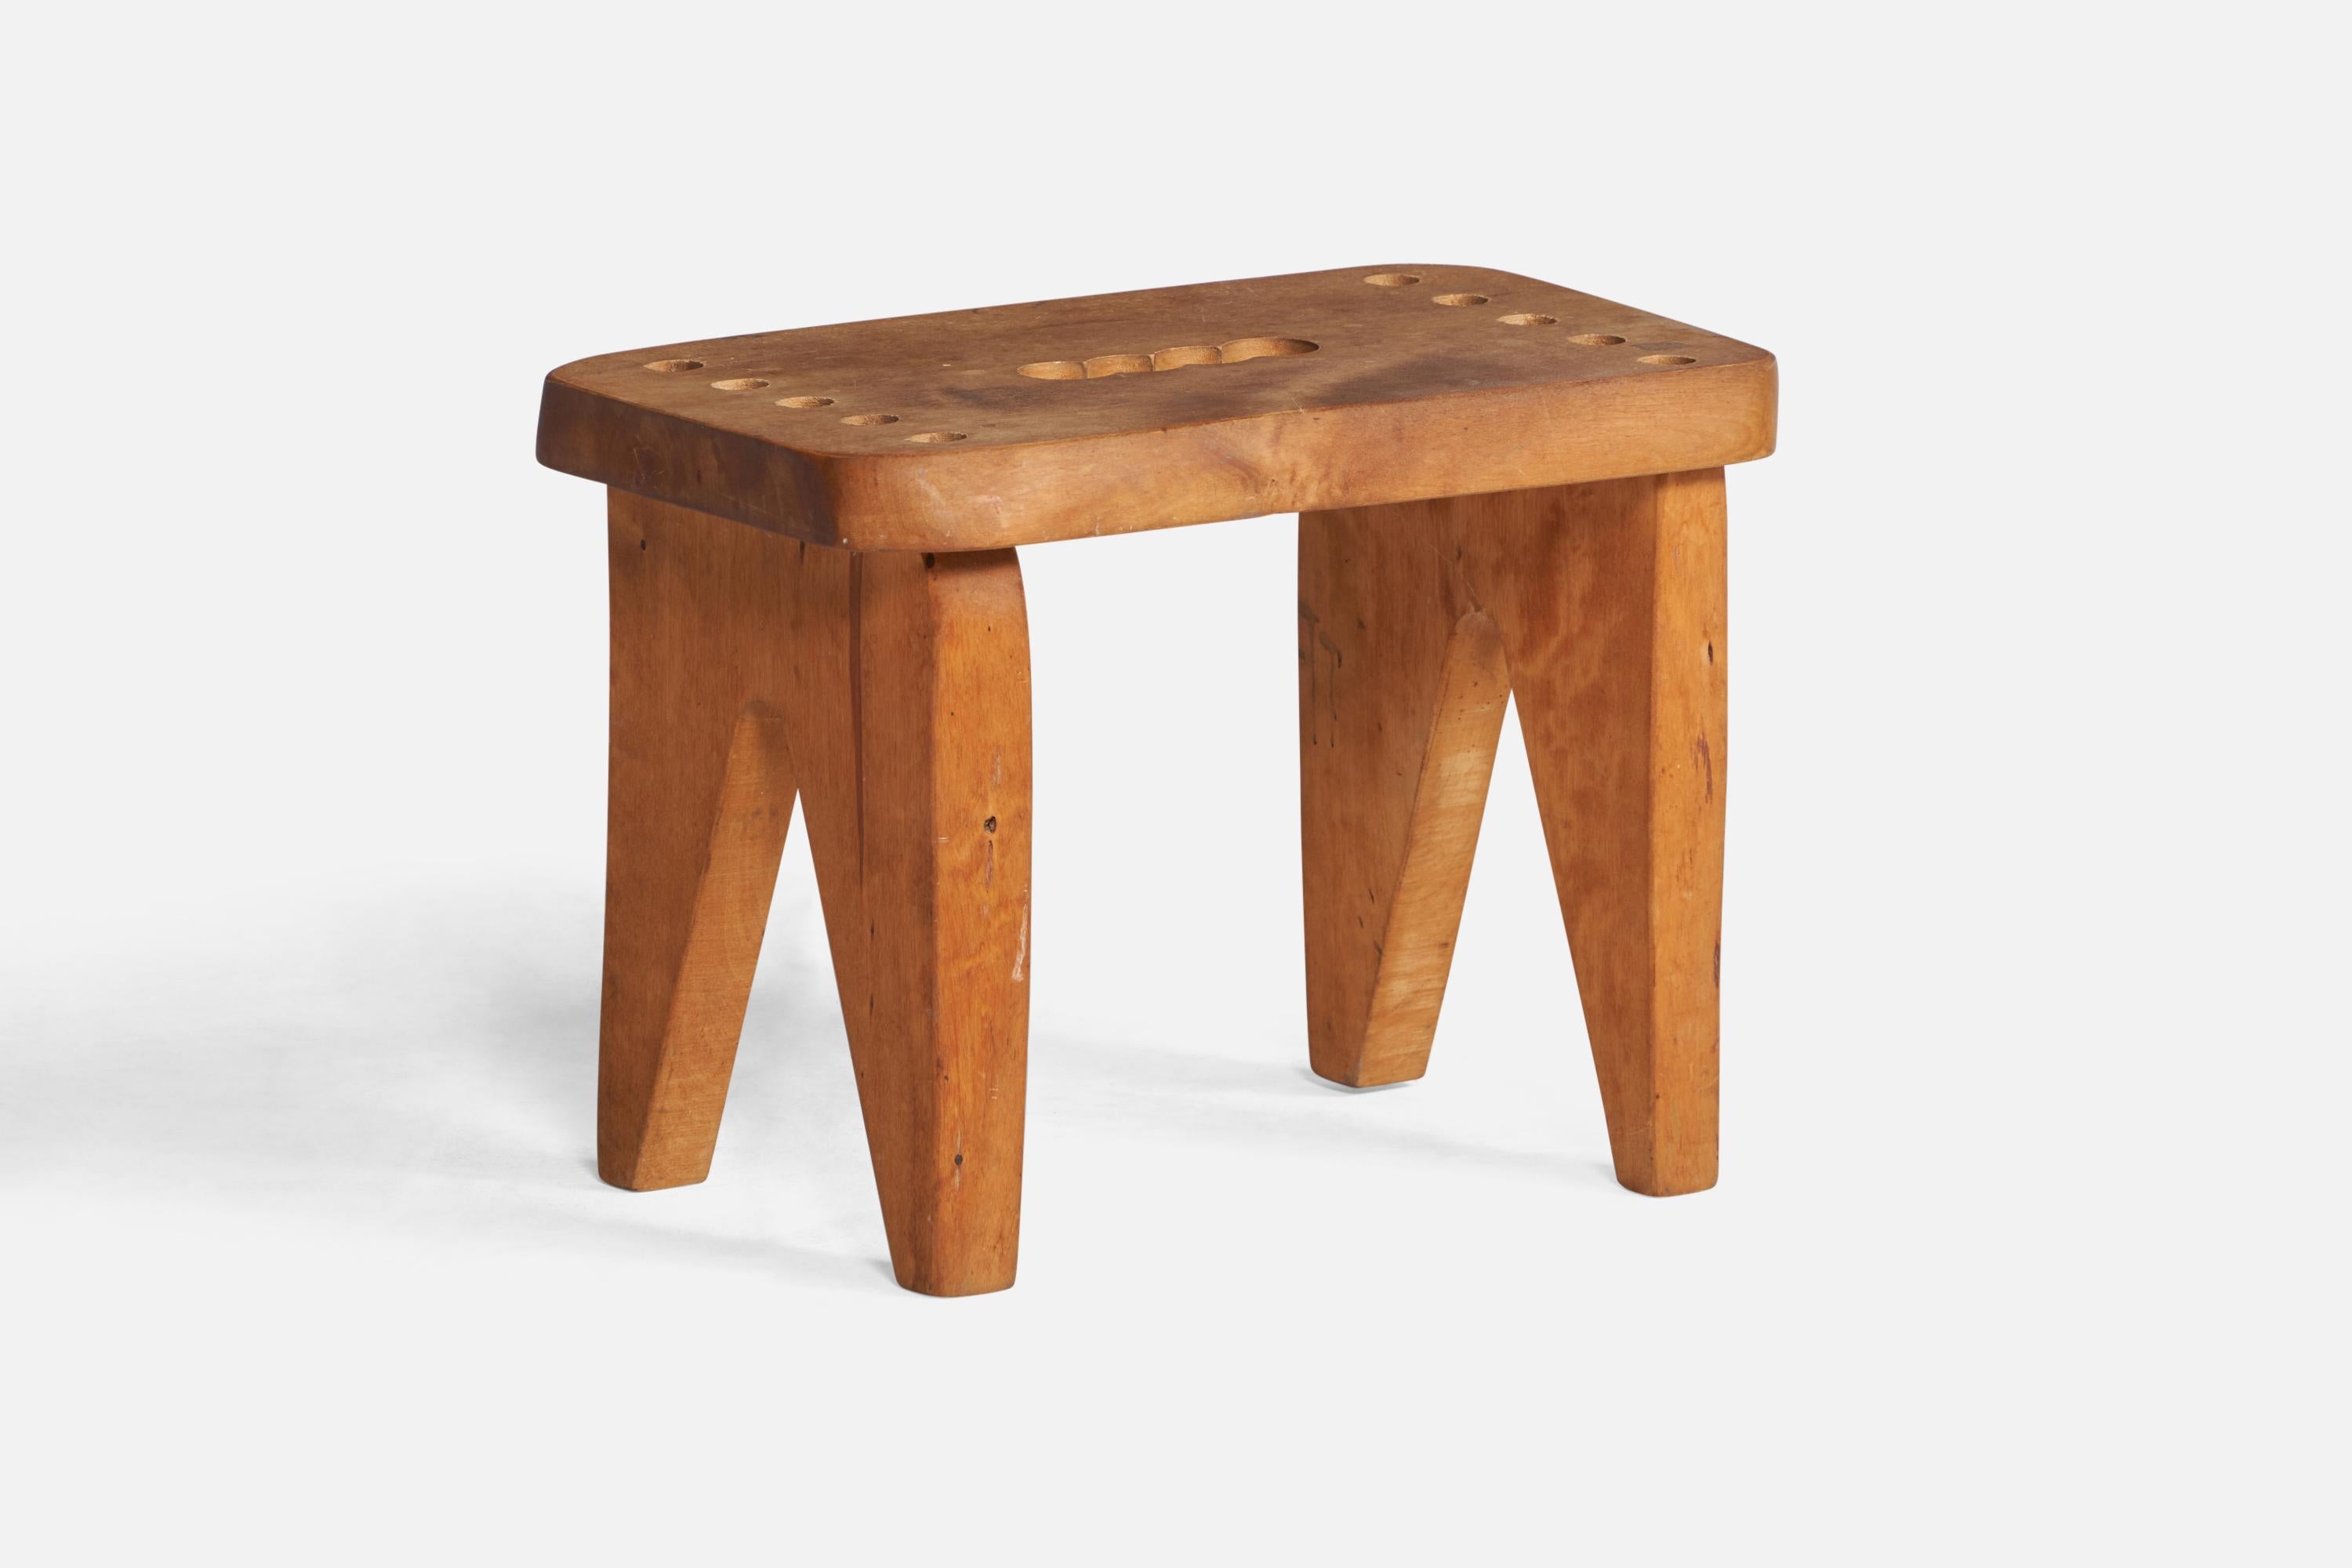 A small pine stool designed and produced in Sweden, c. 1950s.

seat height 10.8